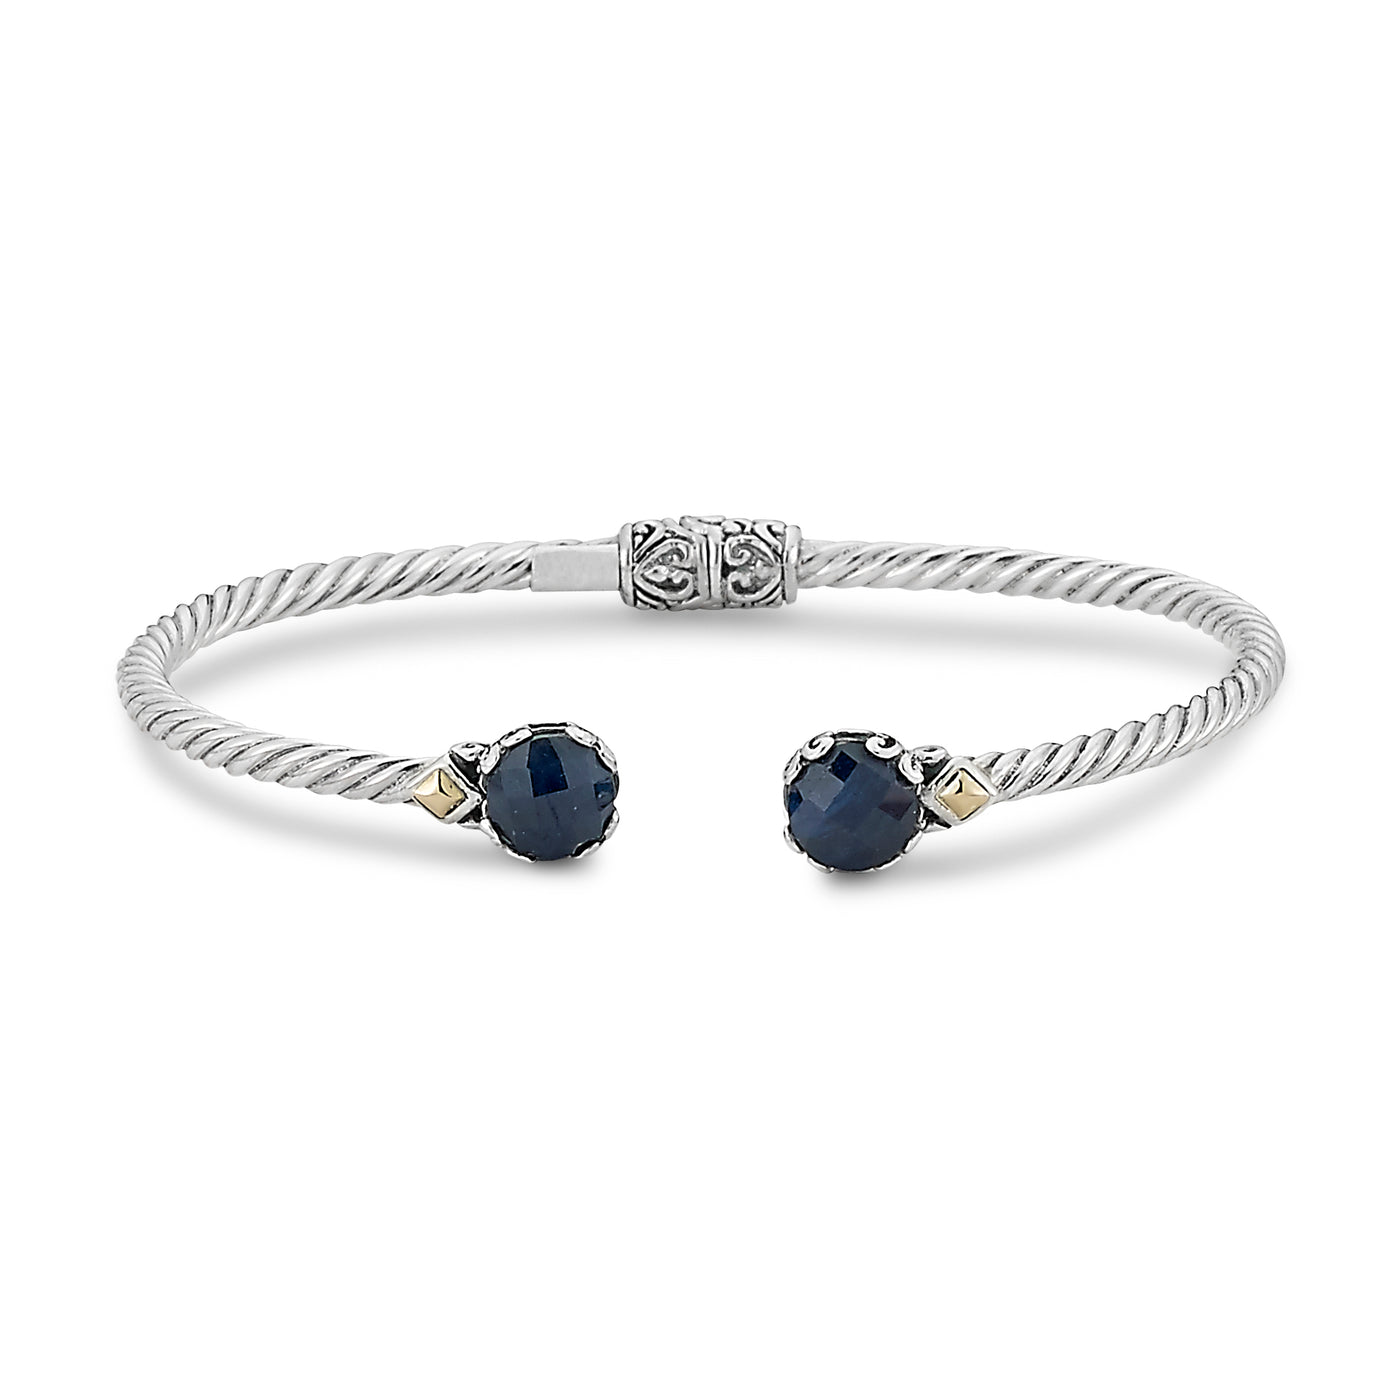 SS/18K 7MM ROUND BLUE SAPPHIRE TWISTED CABLE BANGLE IN 3MM